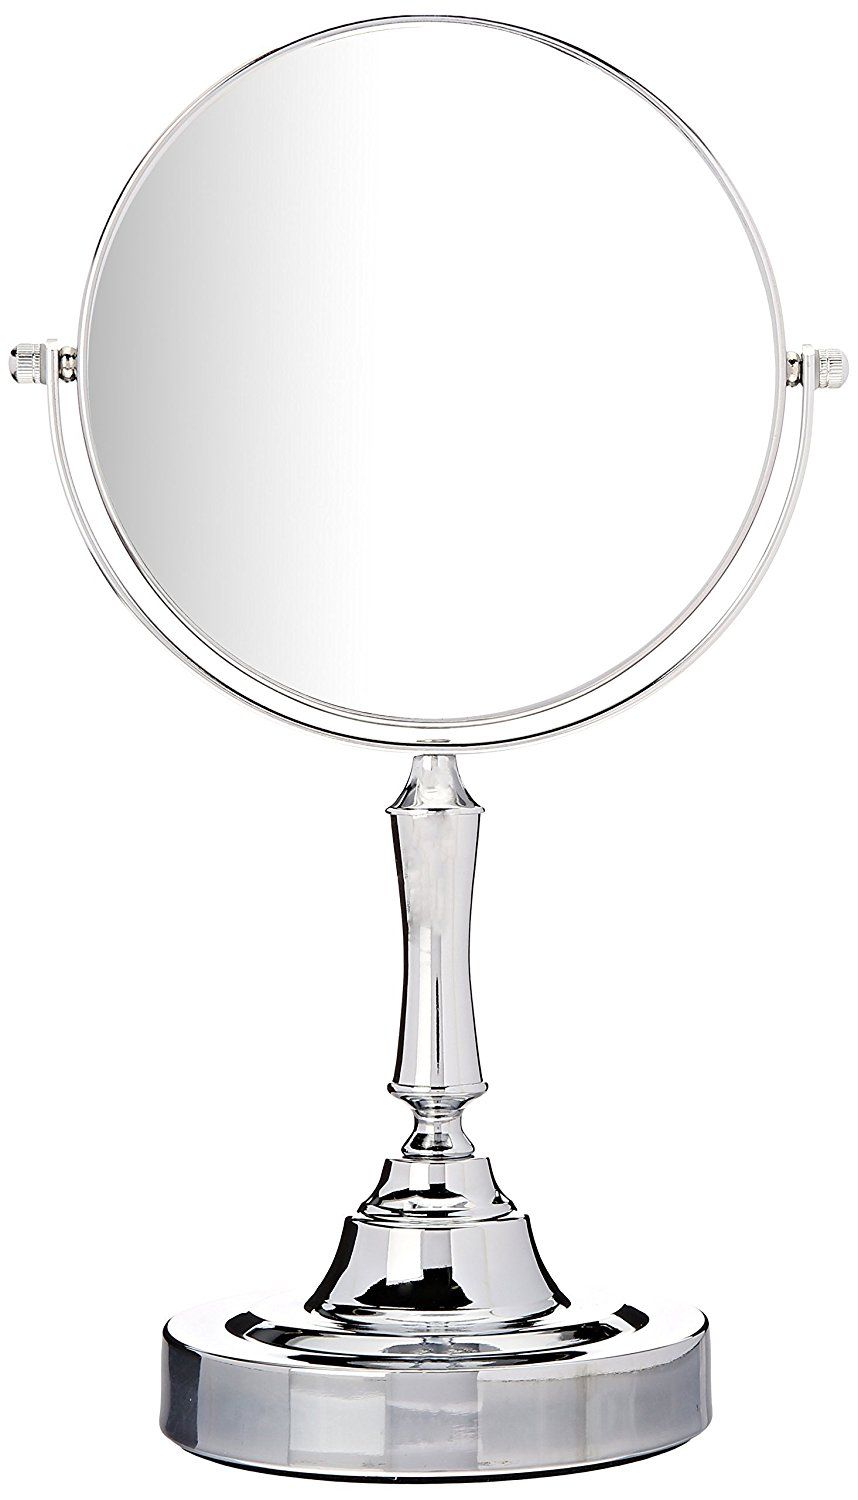 5 makeup mirrors that will satisfy every budget & vanity